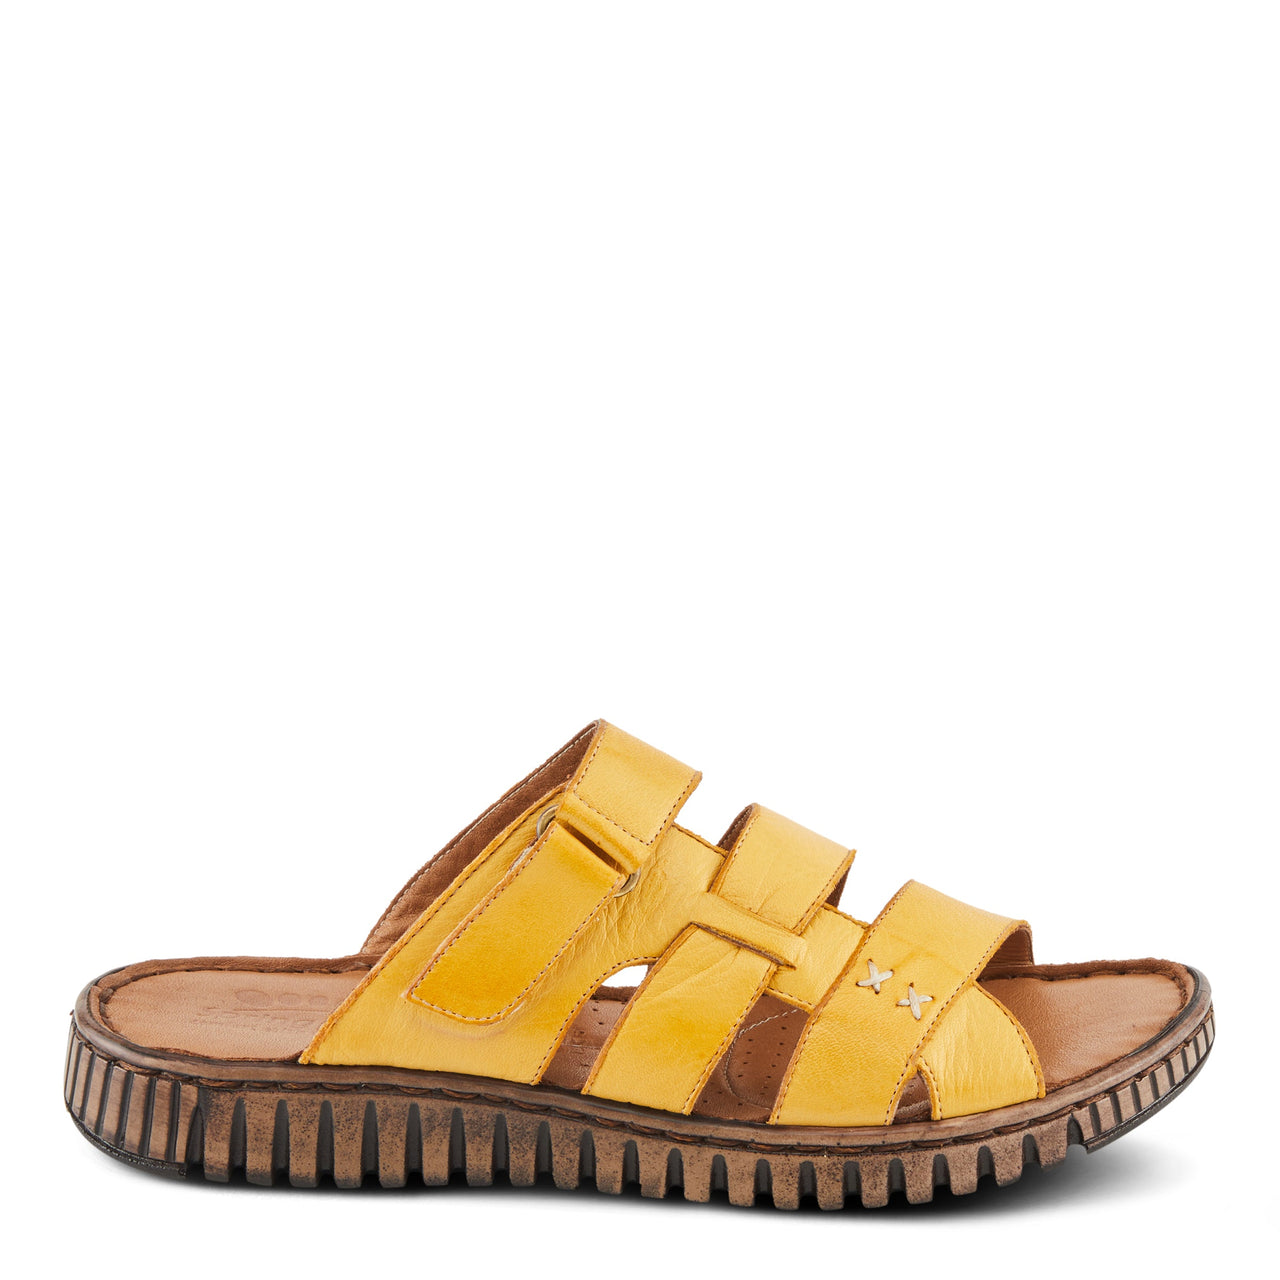 Spring Step Olly Sandals in tan leather with crisscross straps and cushioned insoles for all-day comfort and style